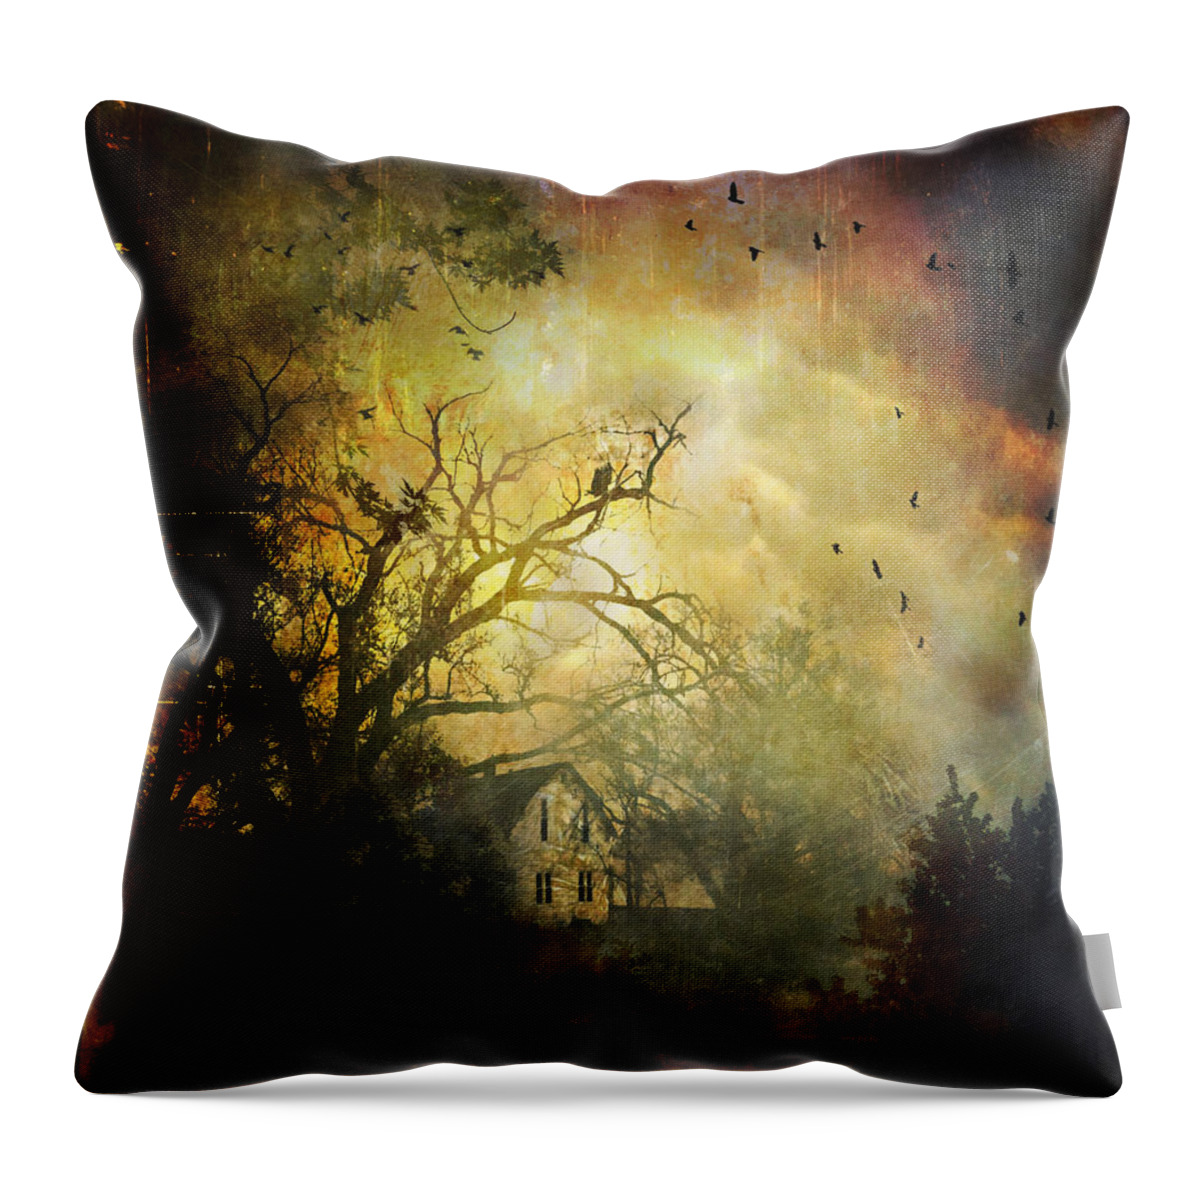 House Throw Pillow featuring the photograph Bygone House On The Hill by Anna Louise